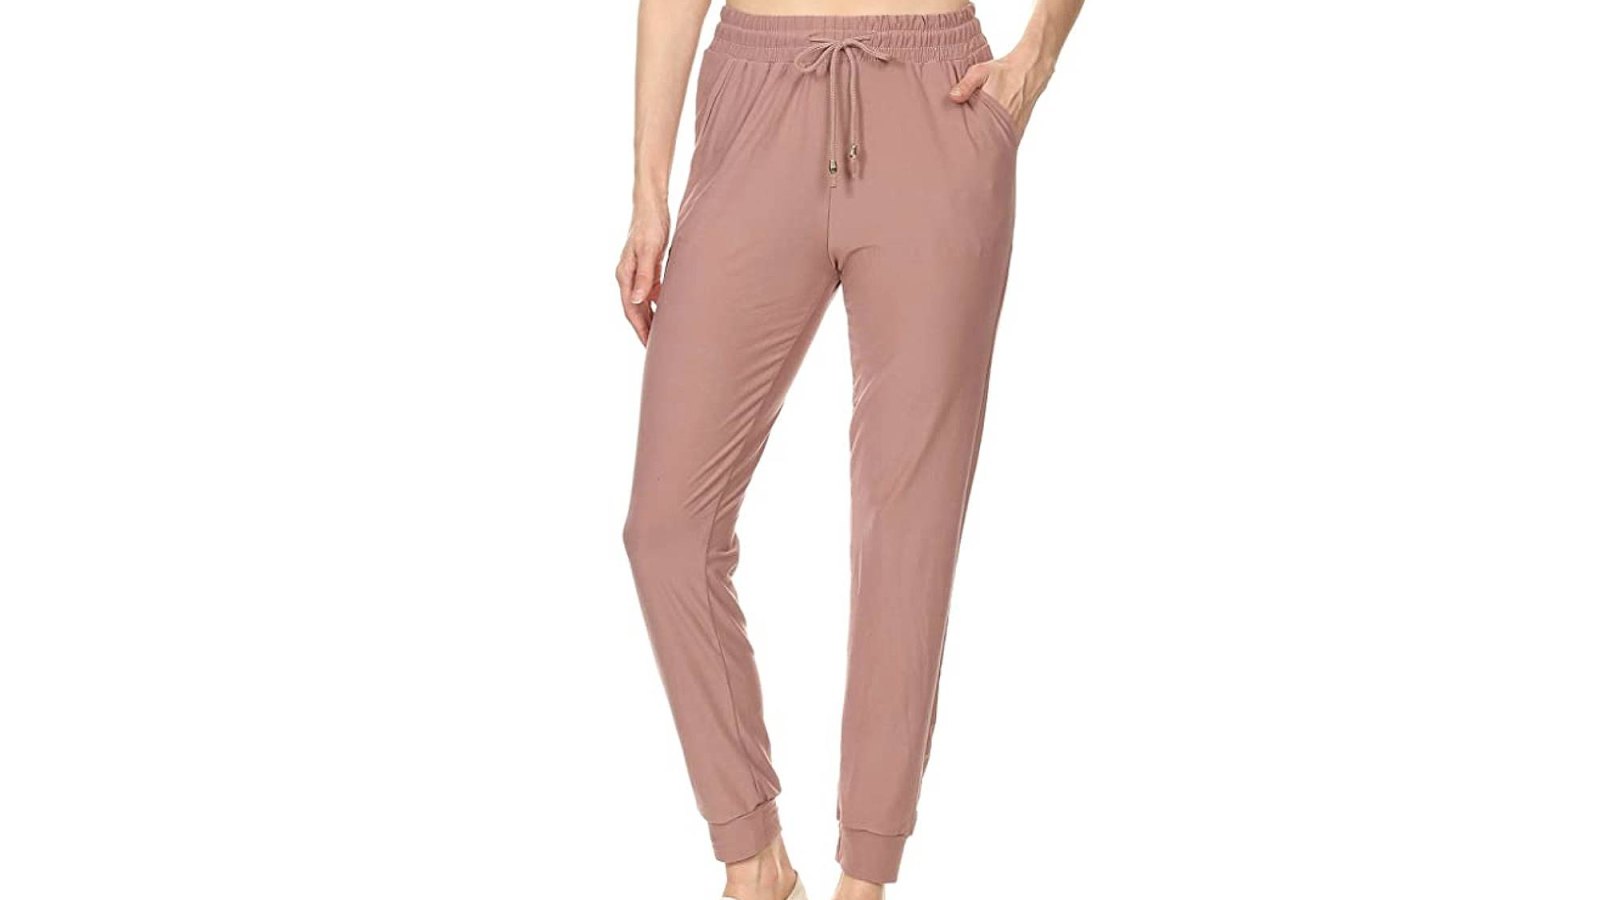 LA12ST Soft Under-$15 Joggers Feel So Much More Expensive